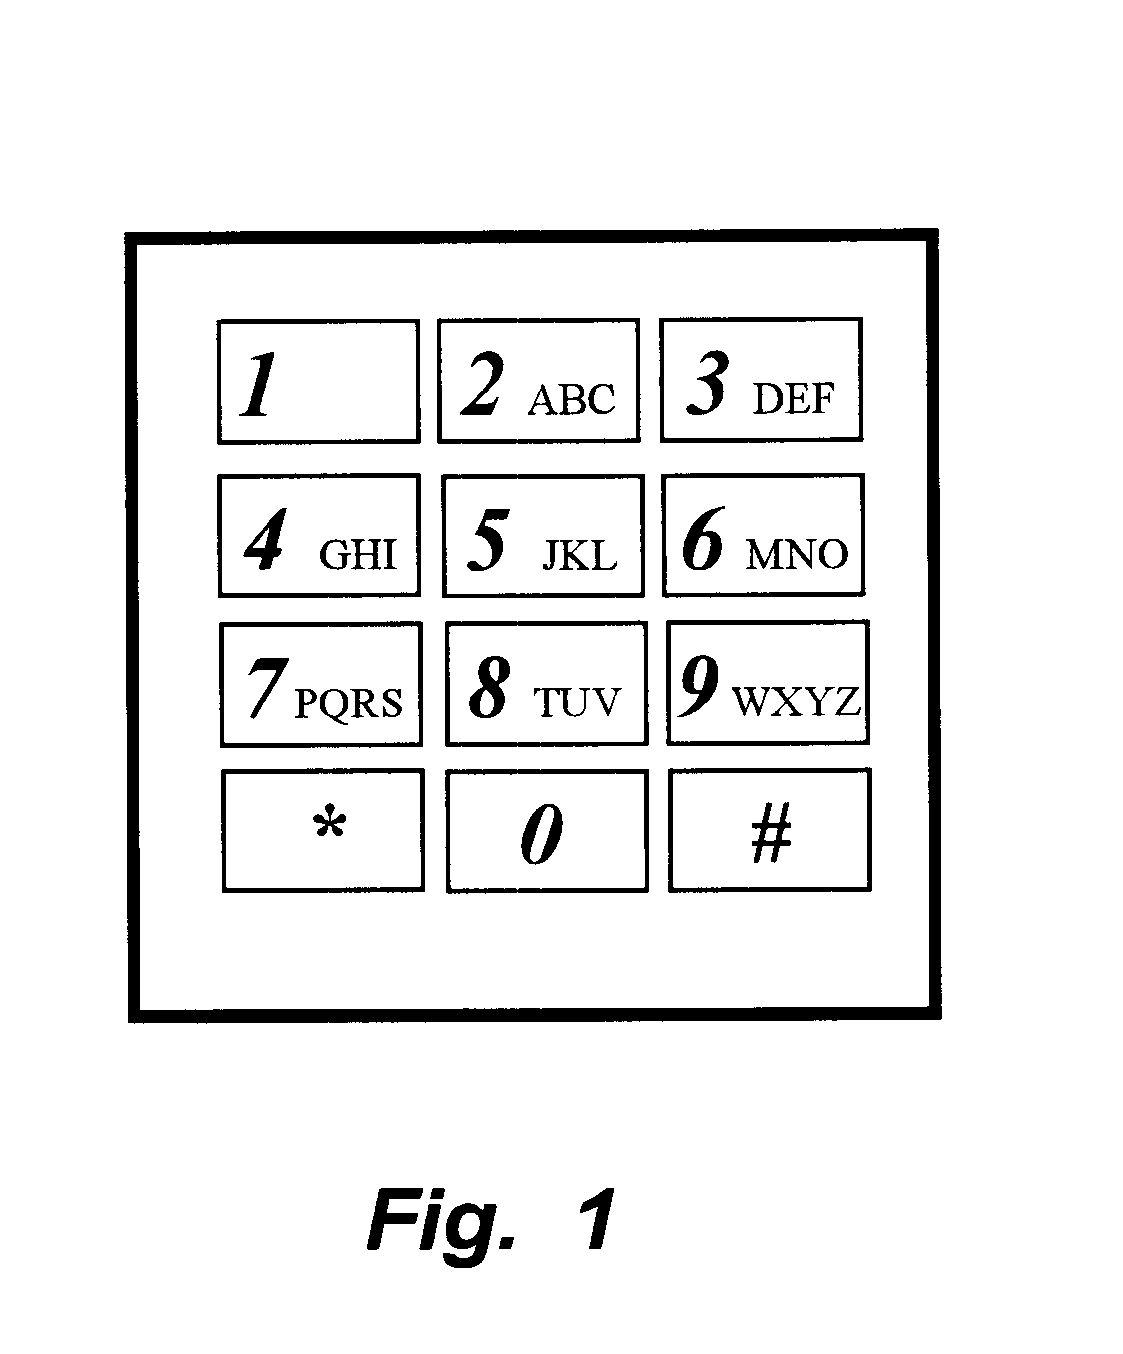 Method and apparatus for displaying a record from a structured database with minimum keystrokes